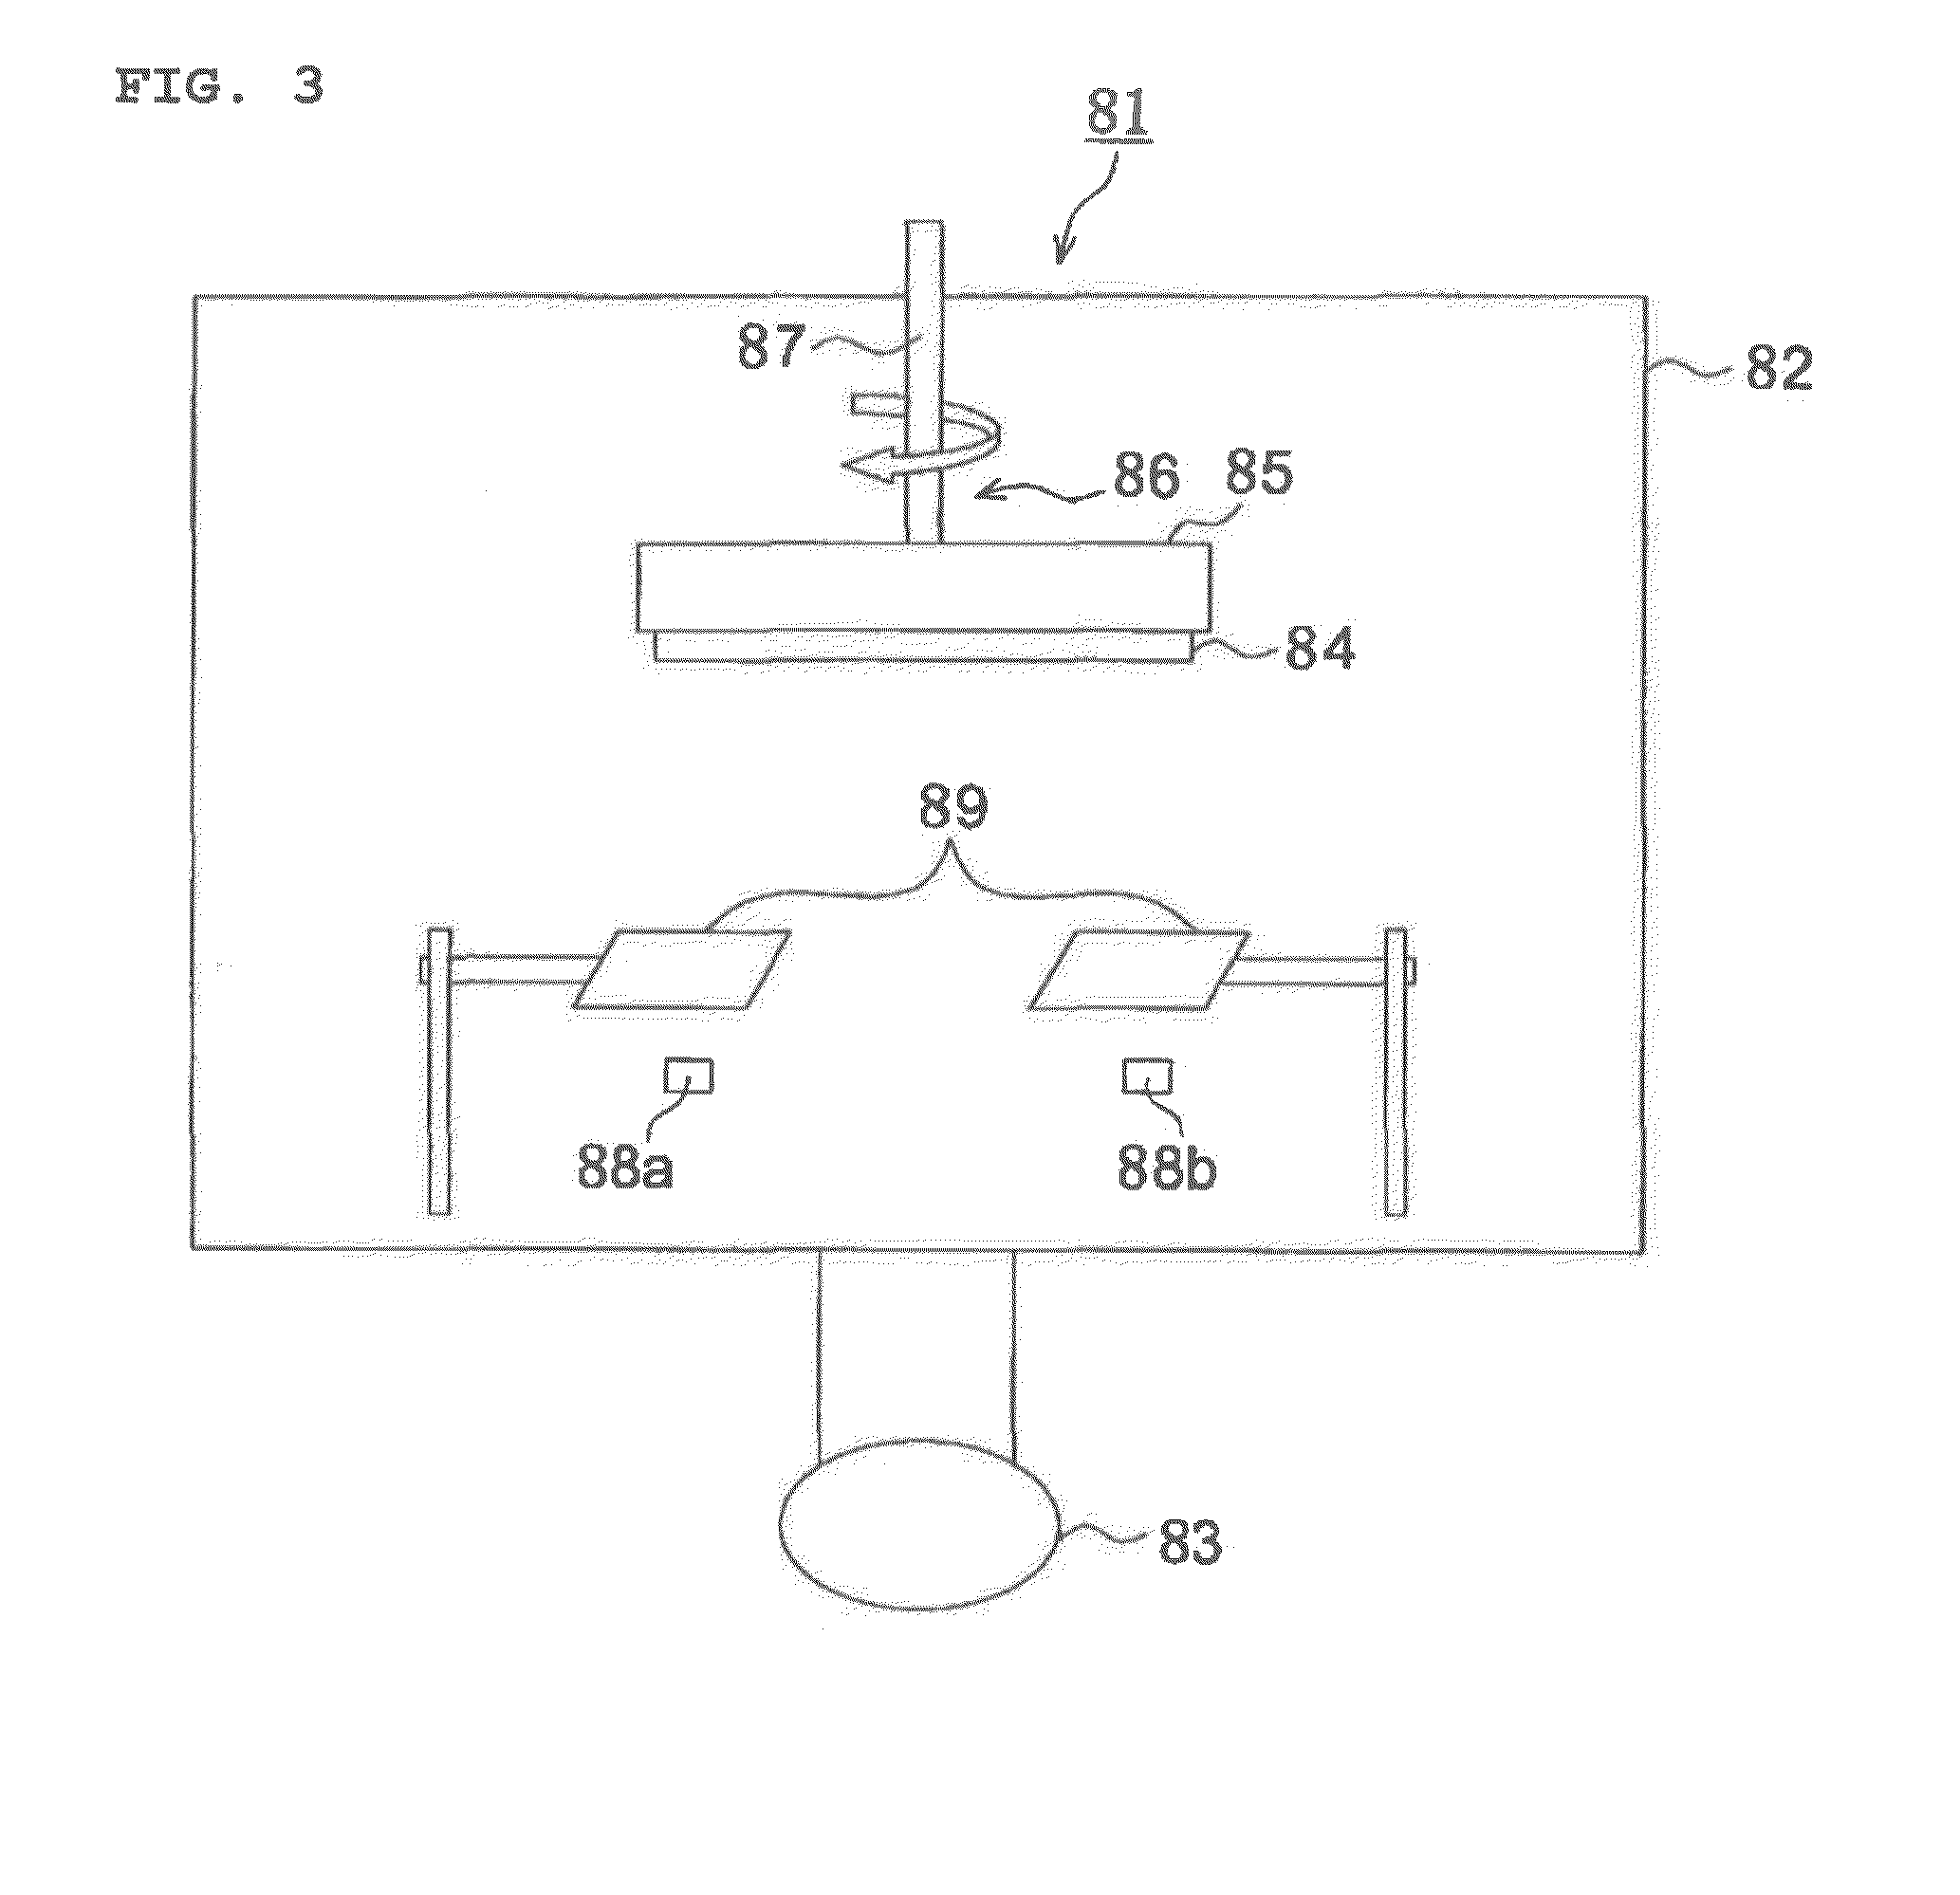 Deposition substrate and scintillator panel